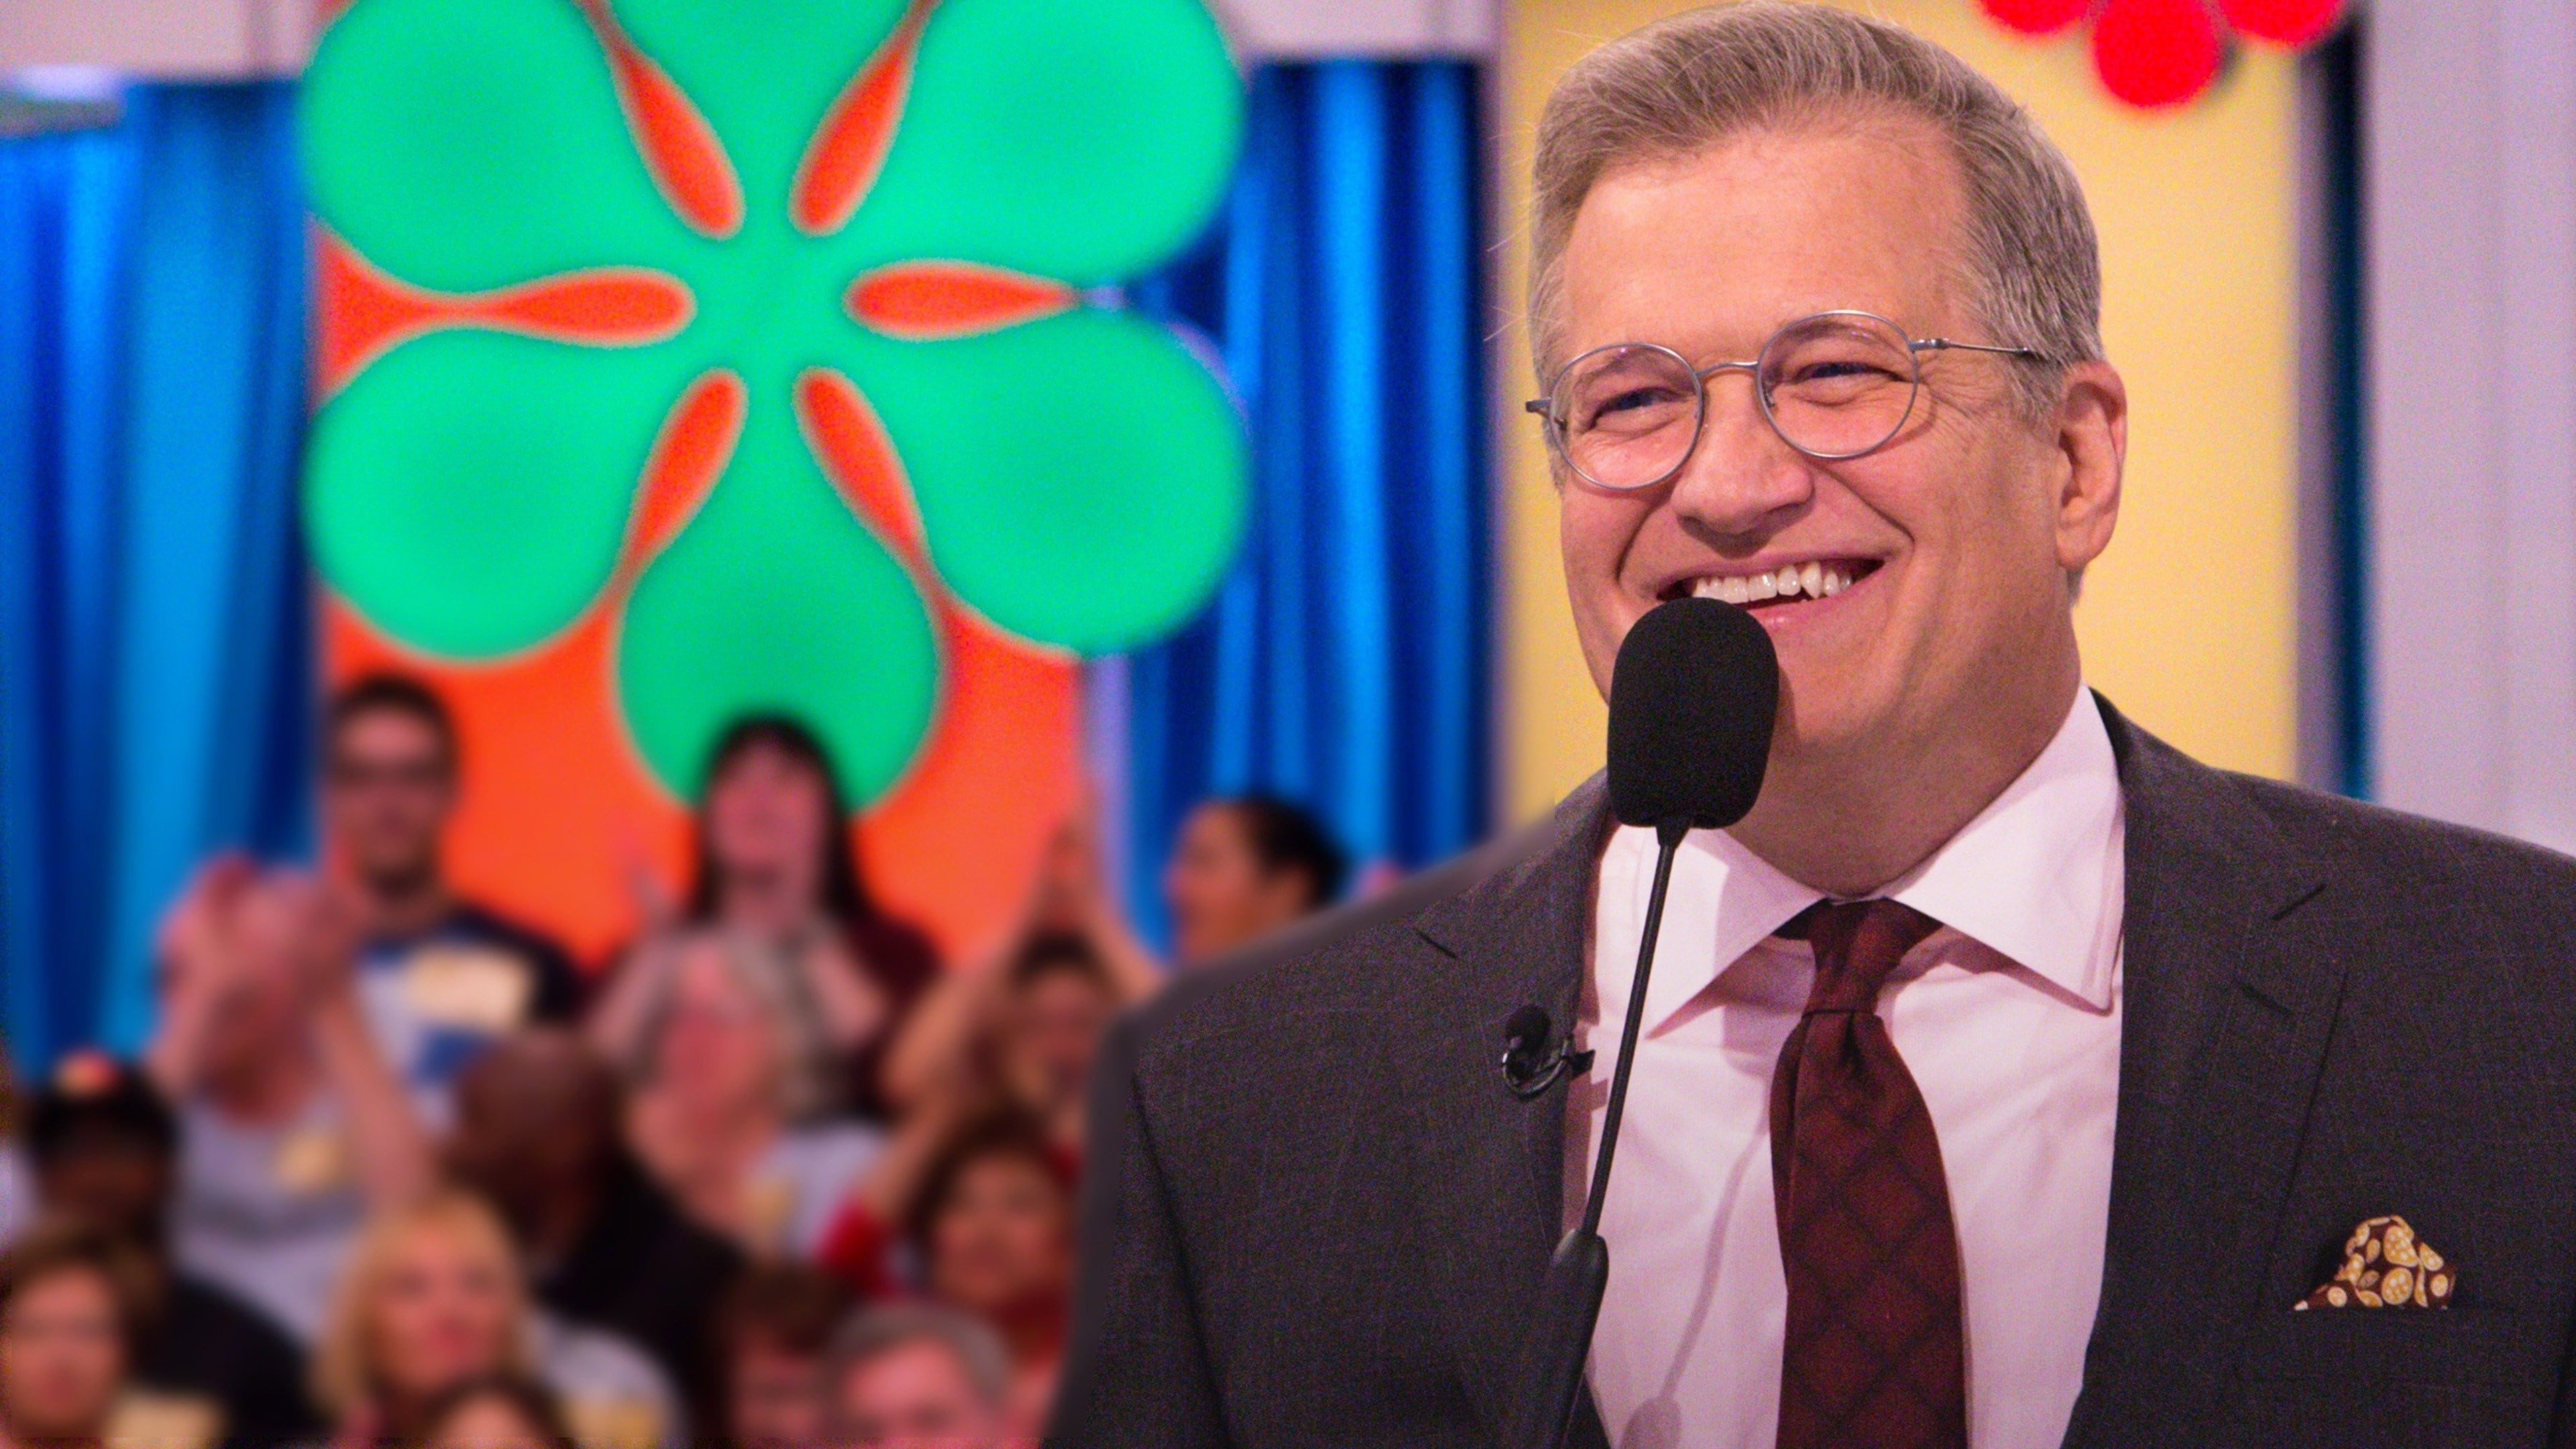 The Price Is Right - Season 2 Episode 150 : The Price Is Right Season 2 Episode 150